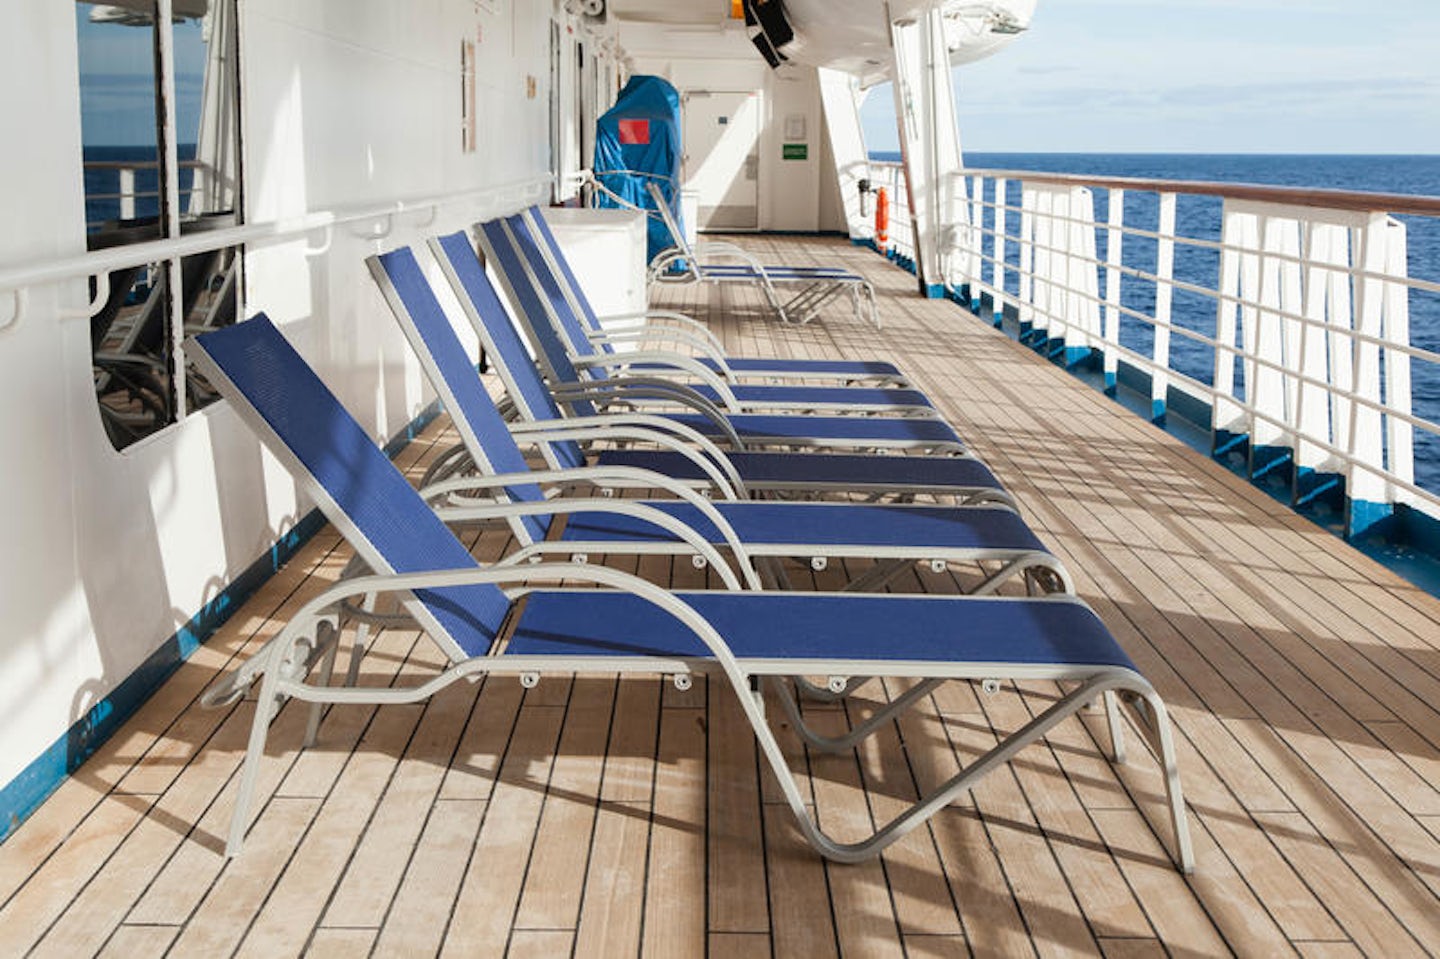 Exterior Deck on Carnival Glory